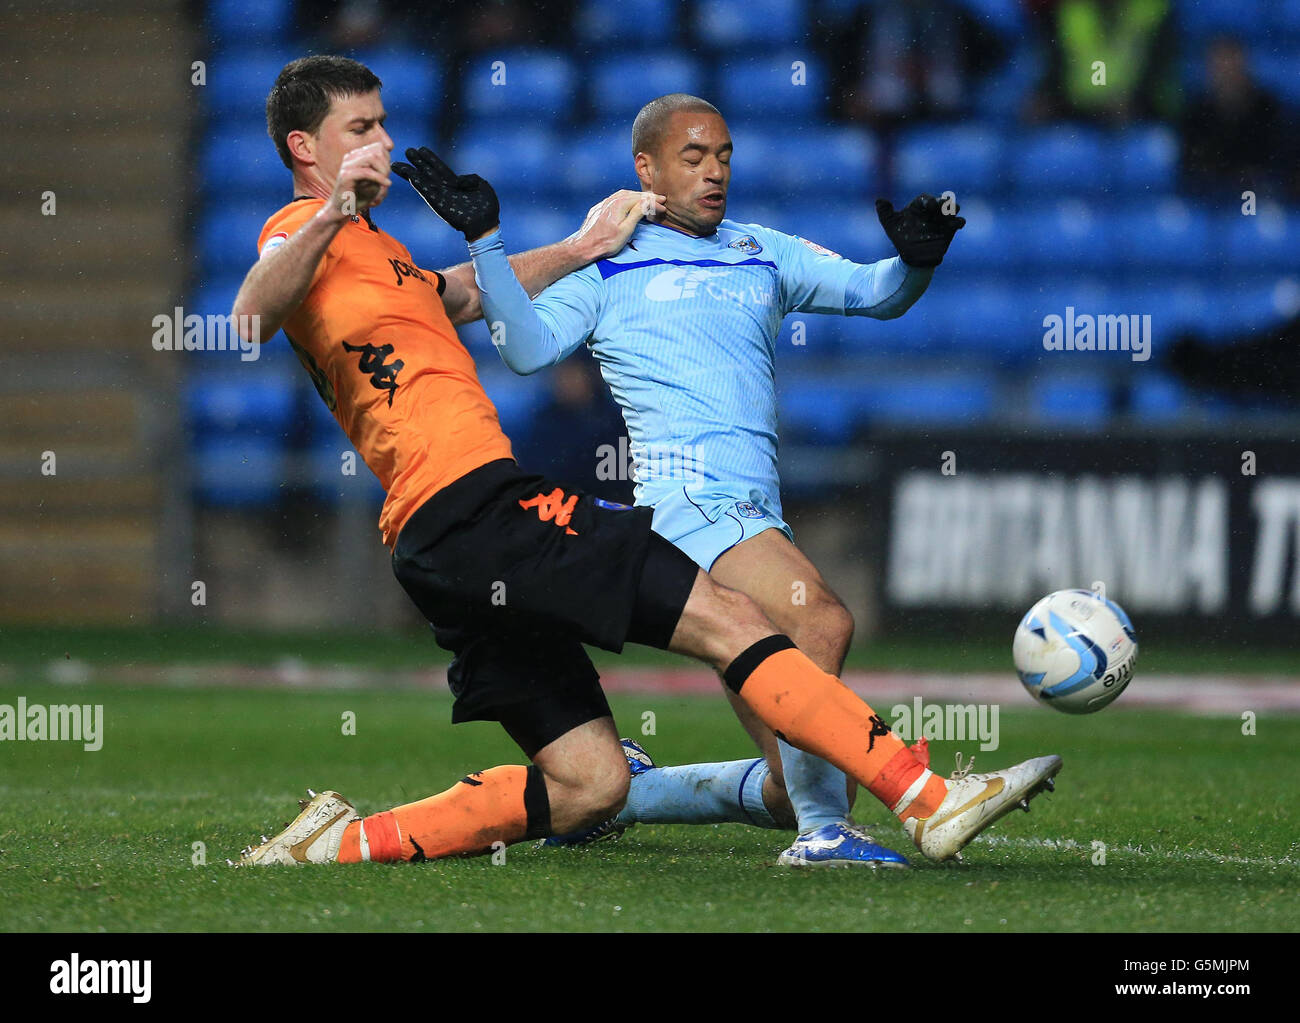 Coventry City's David McGoldrick and Portsmouth's L'ubomir Michalik in action during the npower Football League One match at the Ricoh Arena, Coventry. Stock Photo